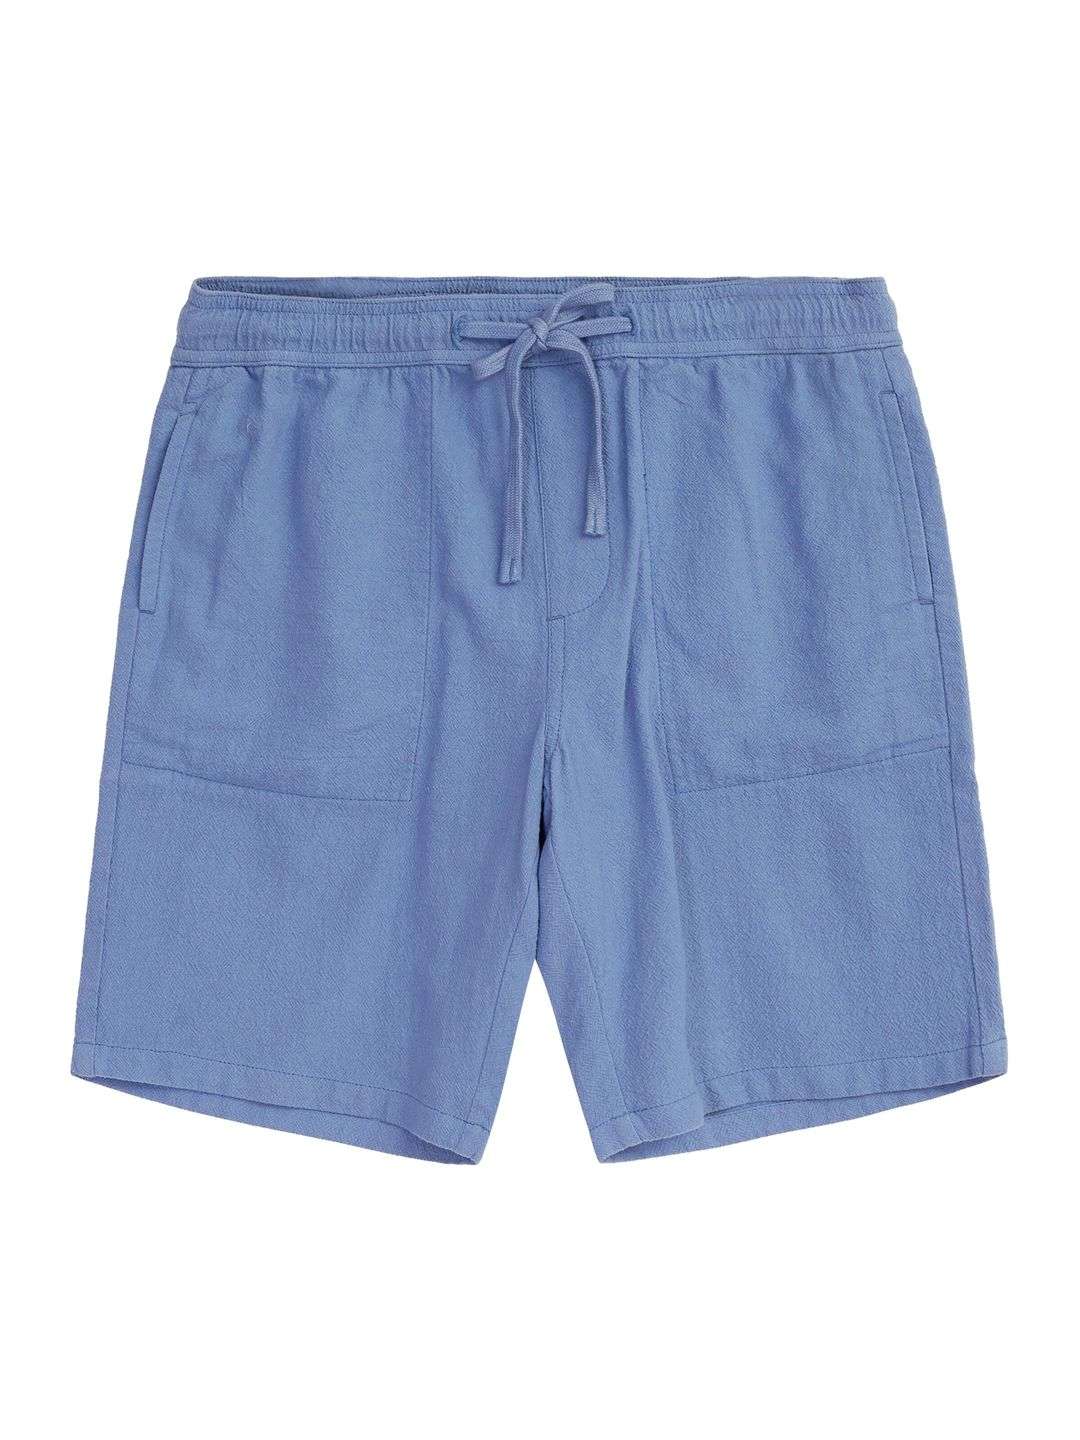 Shorts Fig Loose Crushed Cotton moonlight blue von KnowledgeCotton Apparel